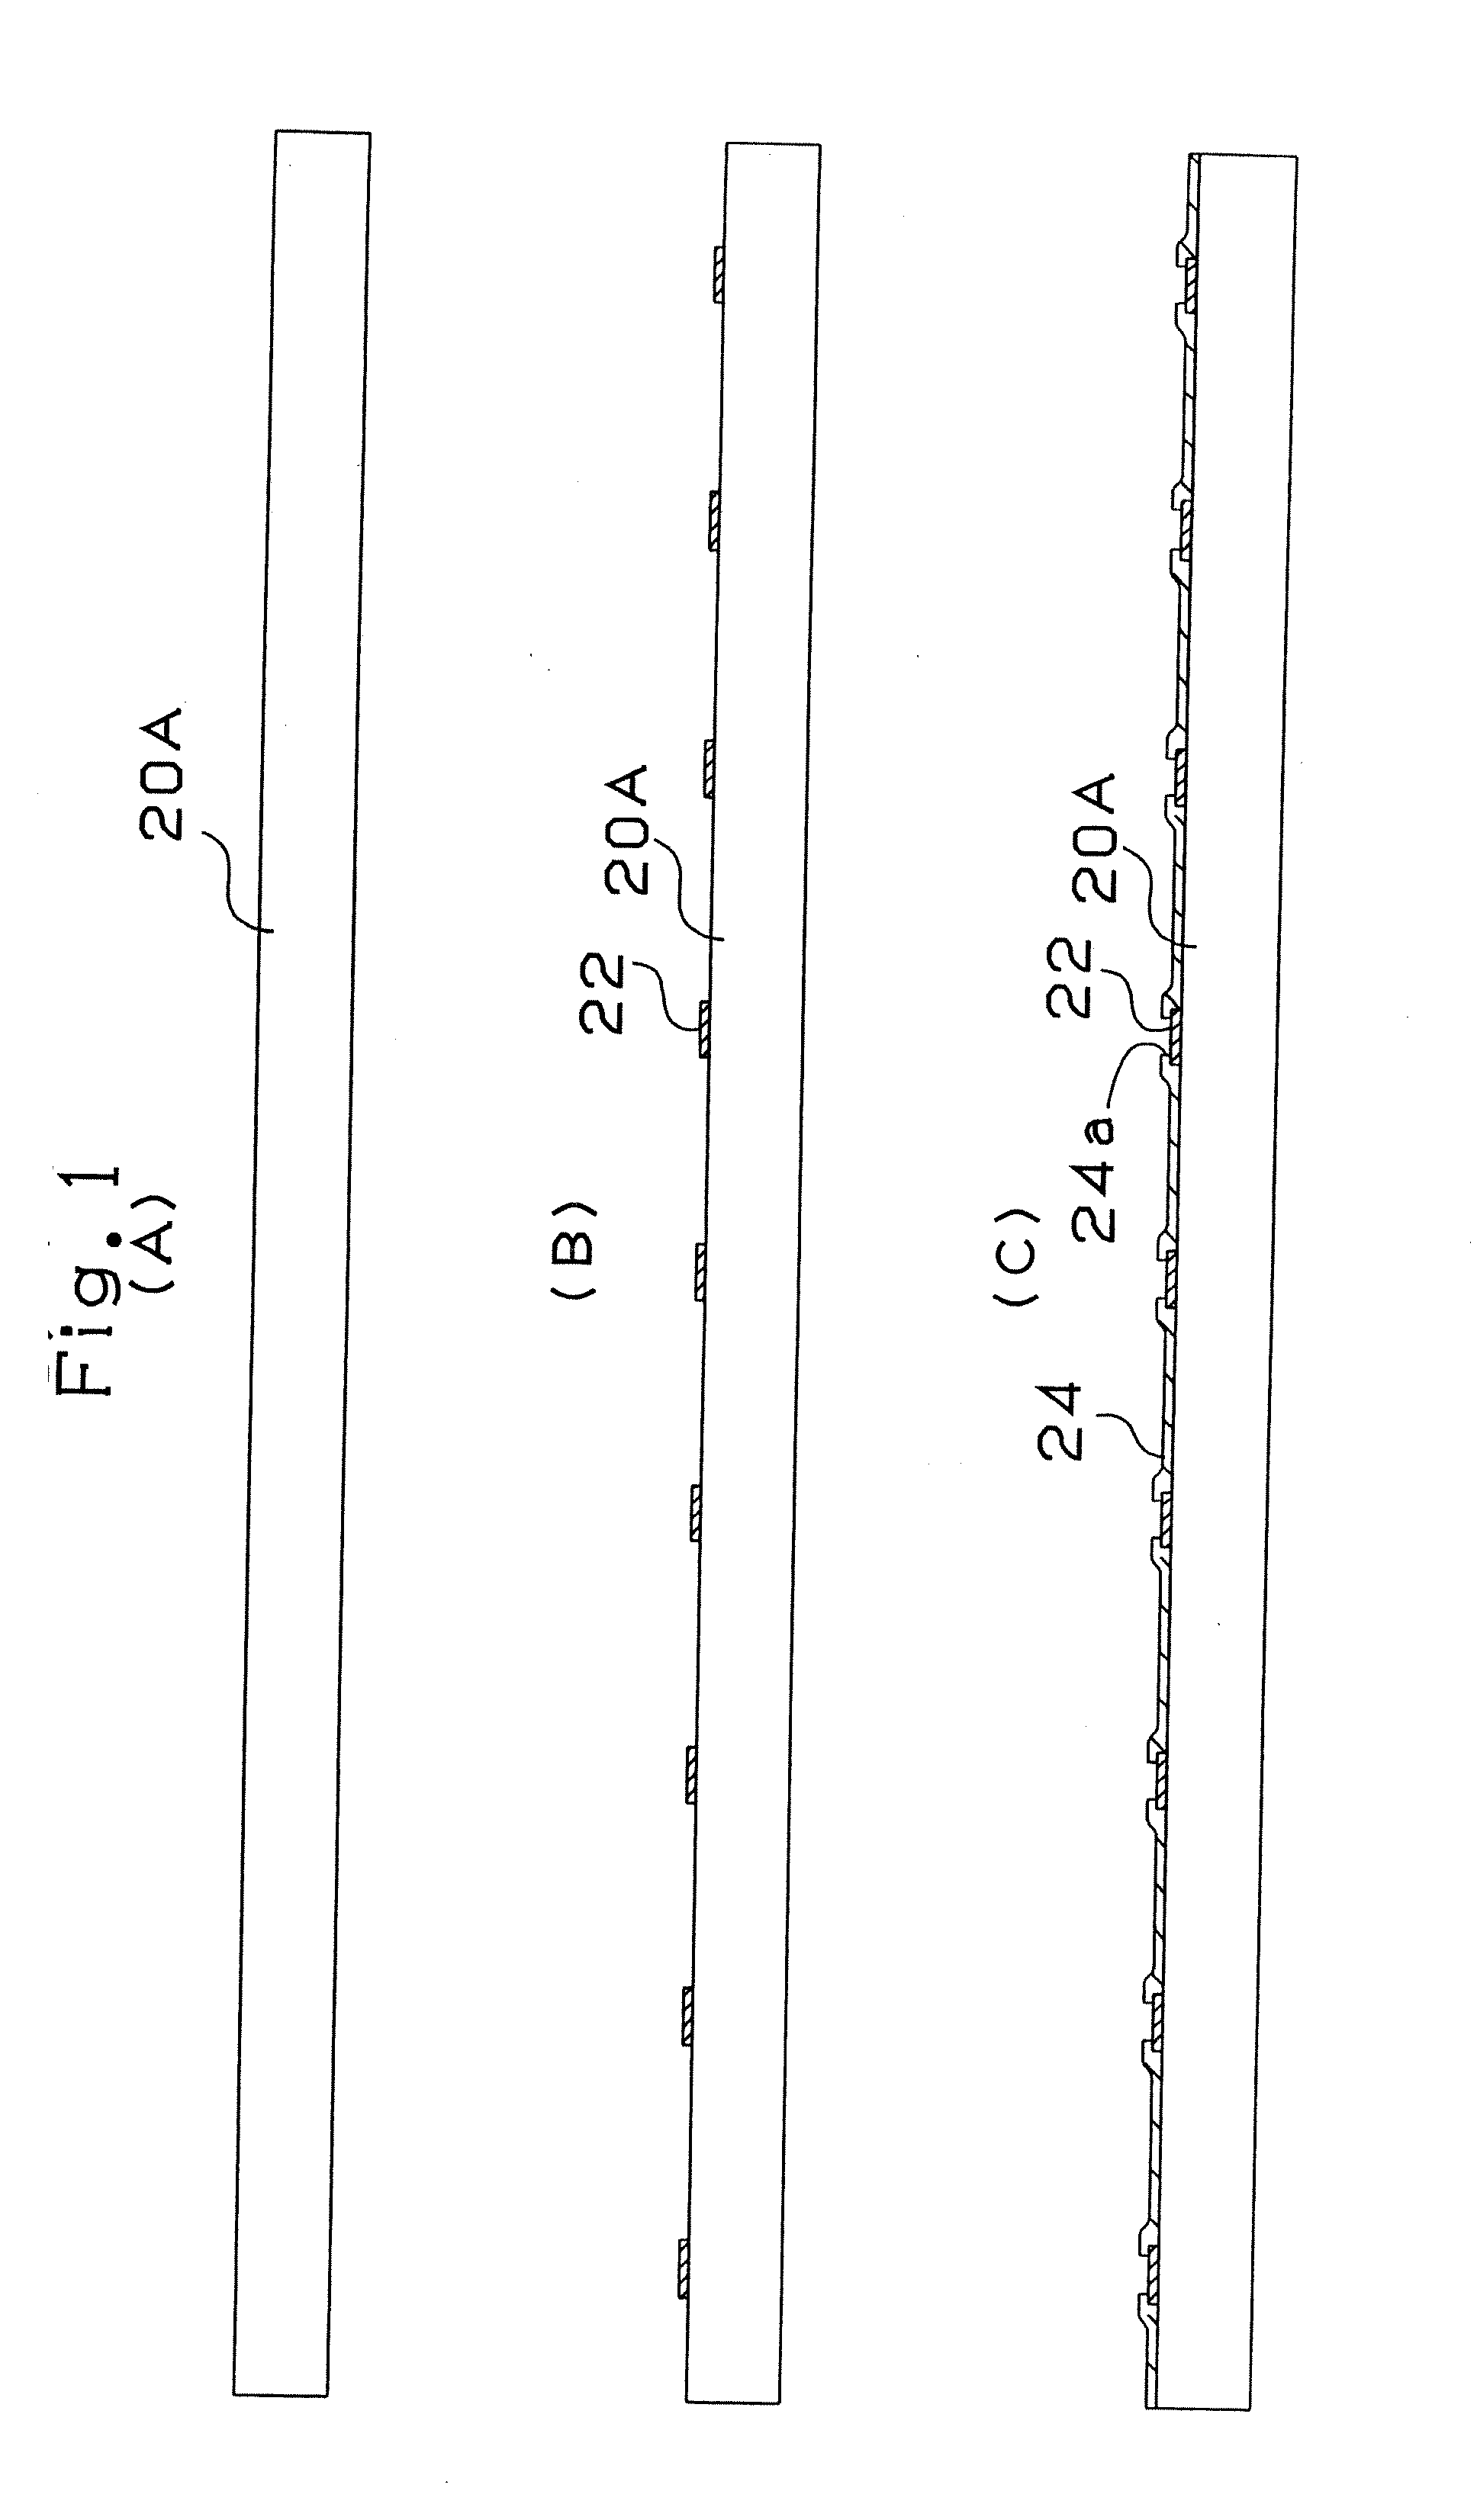 Semiconductor element, method of manufacturing semiconductor element, multi-layer printed circuit board, and method of manufacturing multi-layer printed circuit board